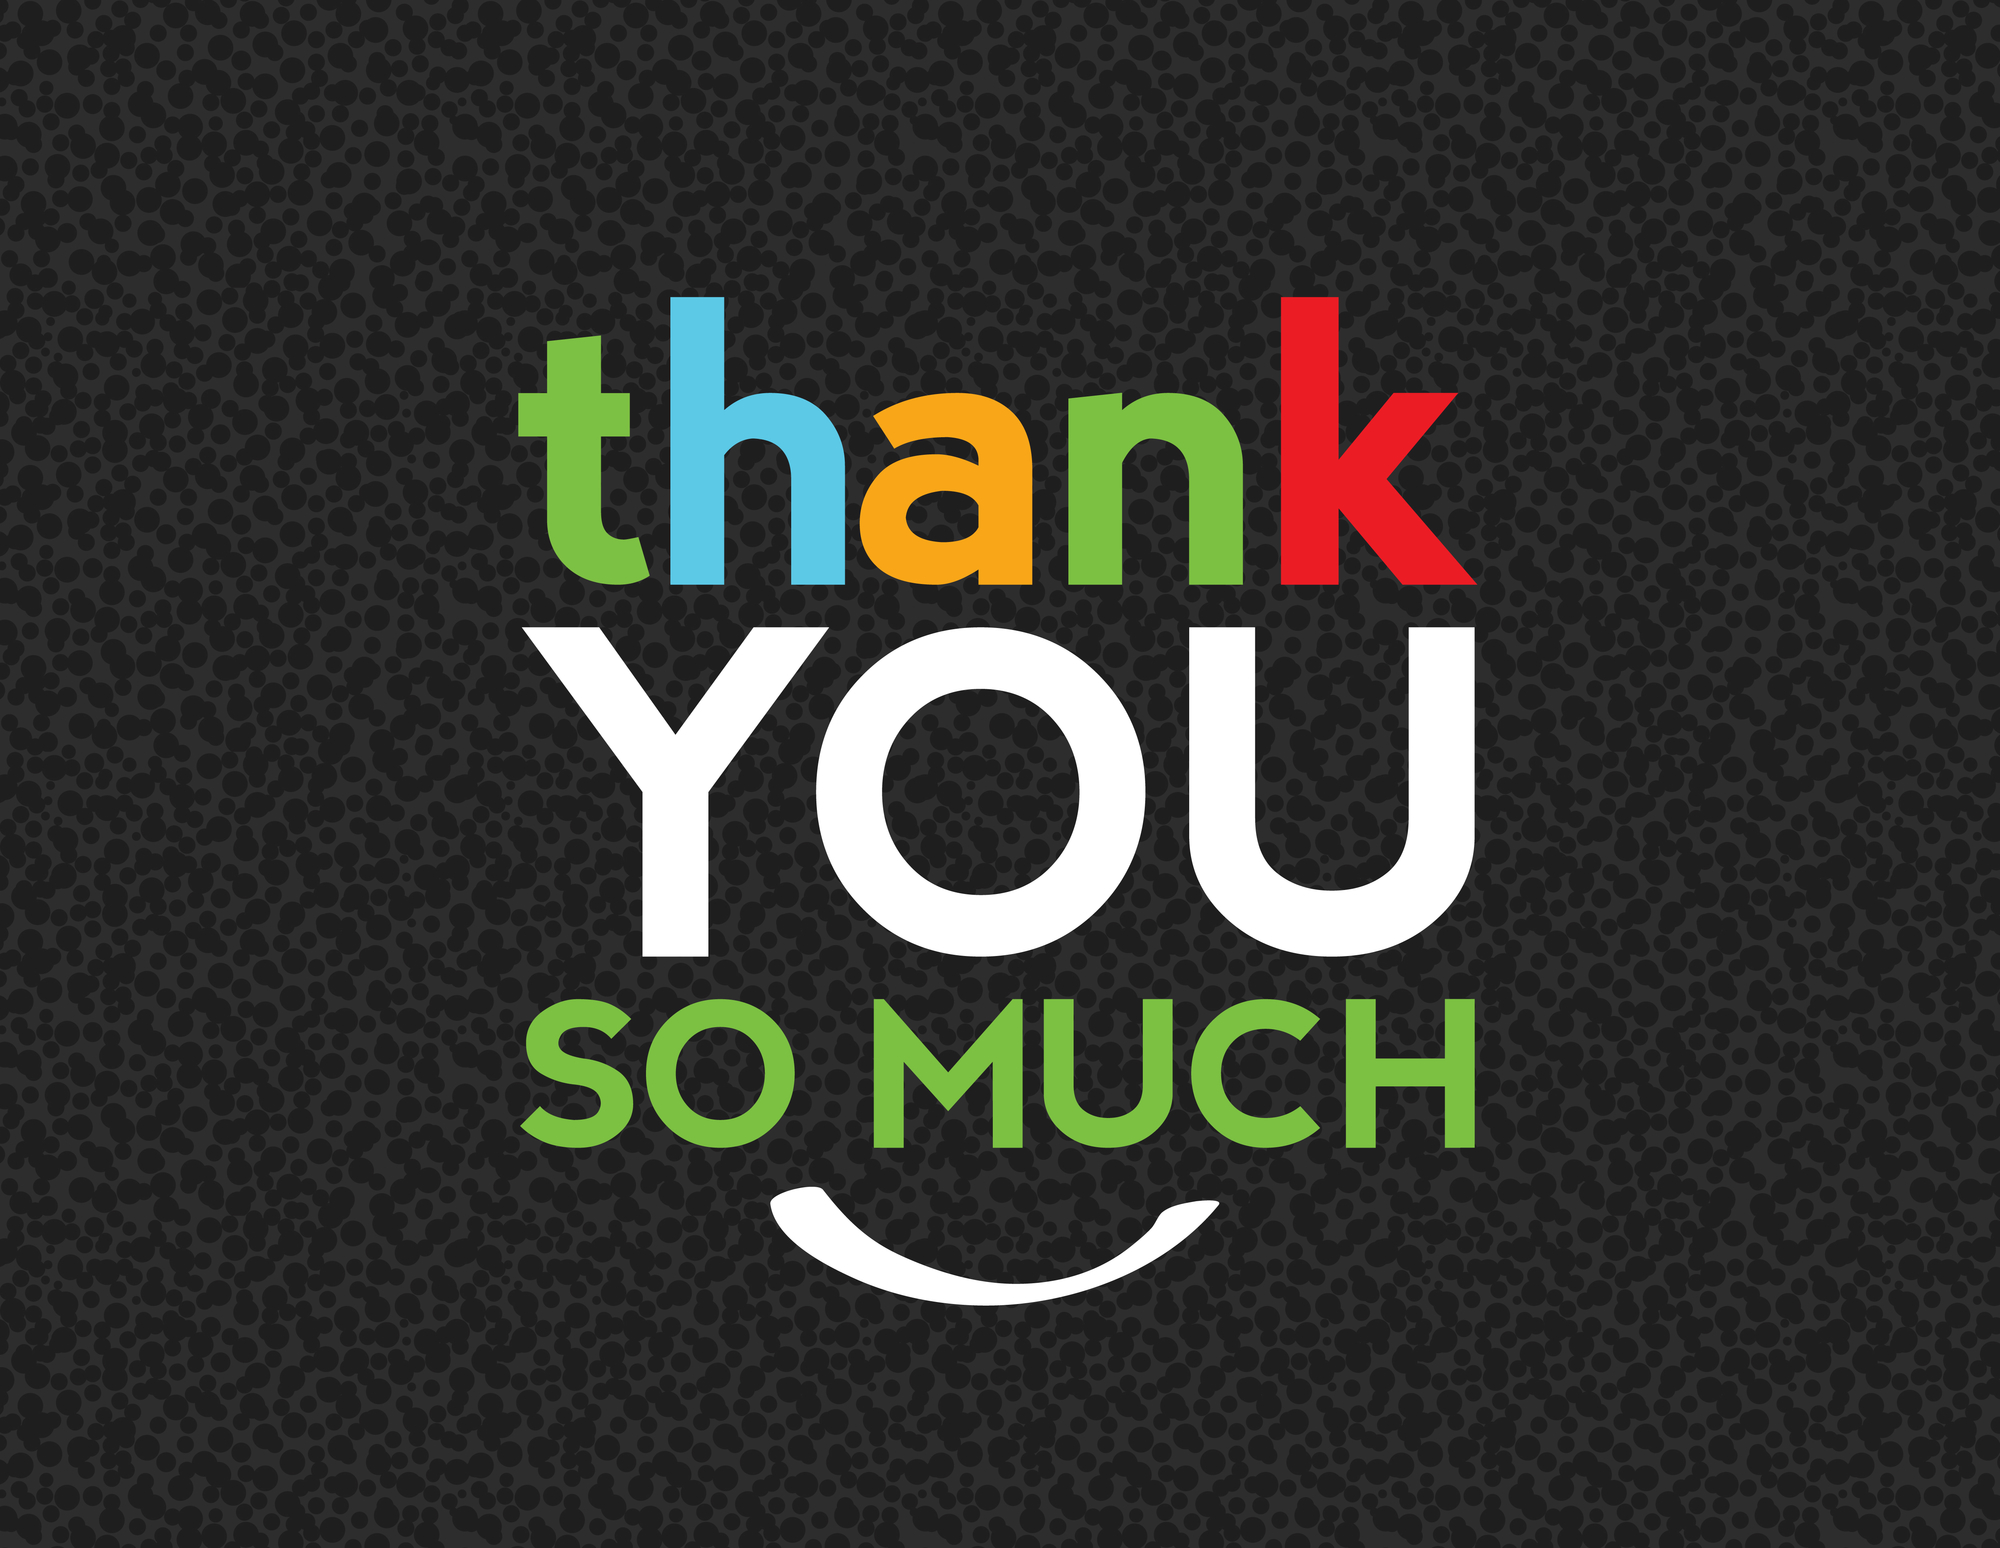 Images Of Thank You So Much Wallpaper For Iphone with HD Wallpaper ...